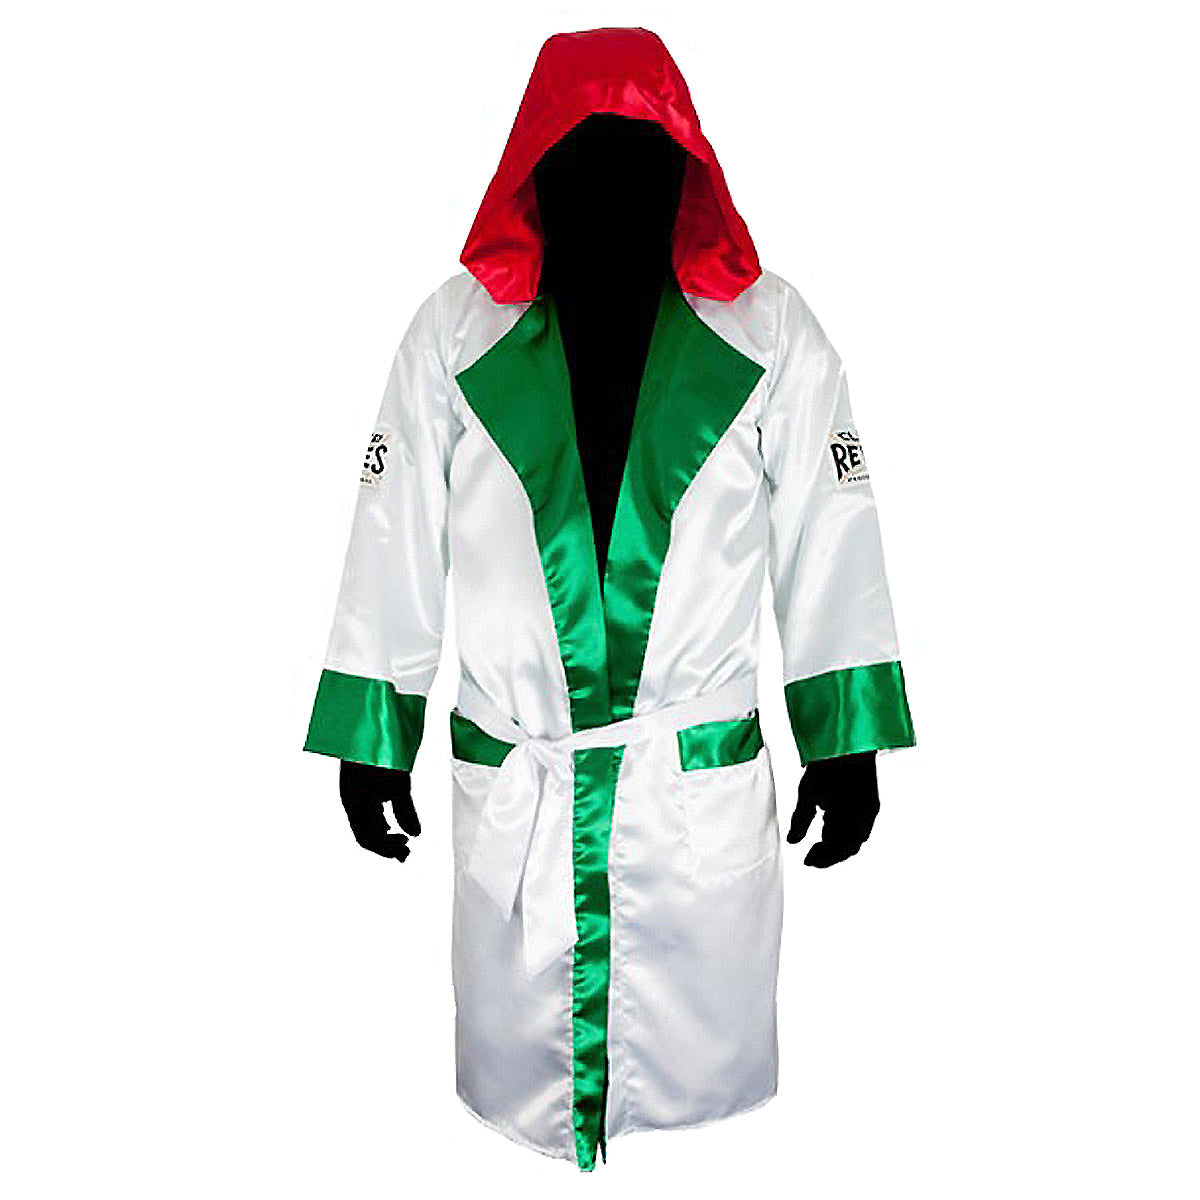 Cleto Reyes Satin Boxing Robe with Hood - Mexican Flag Cleto Reyes